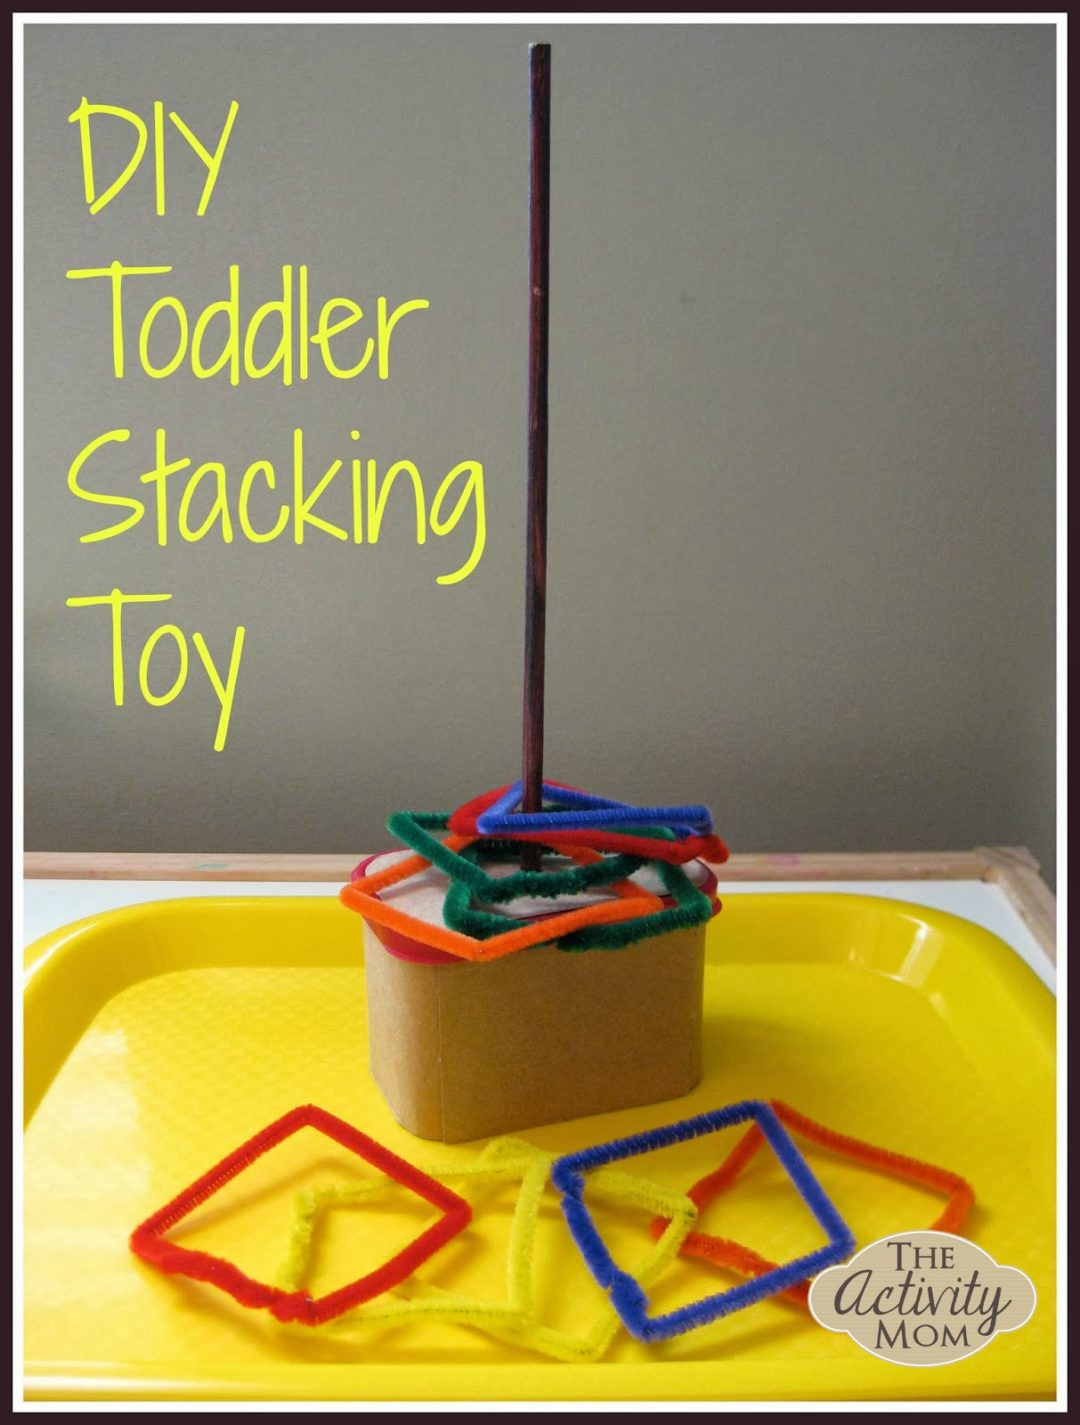 DIY Toddlers Toys
 The Activity Mom DIY Toddler Stacking Toy The Activity Mom